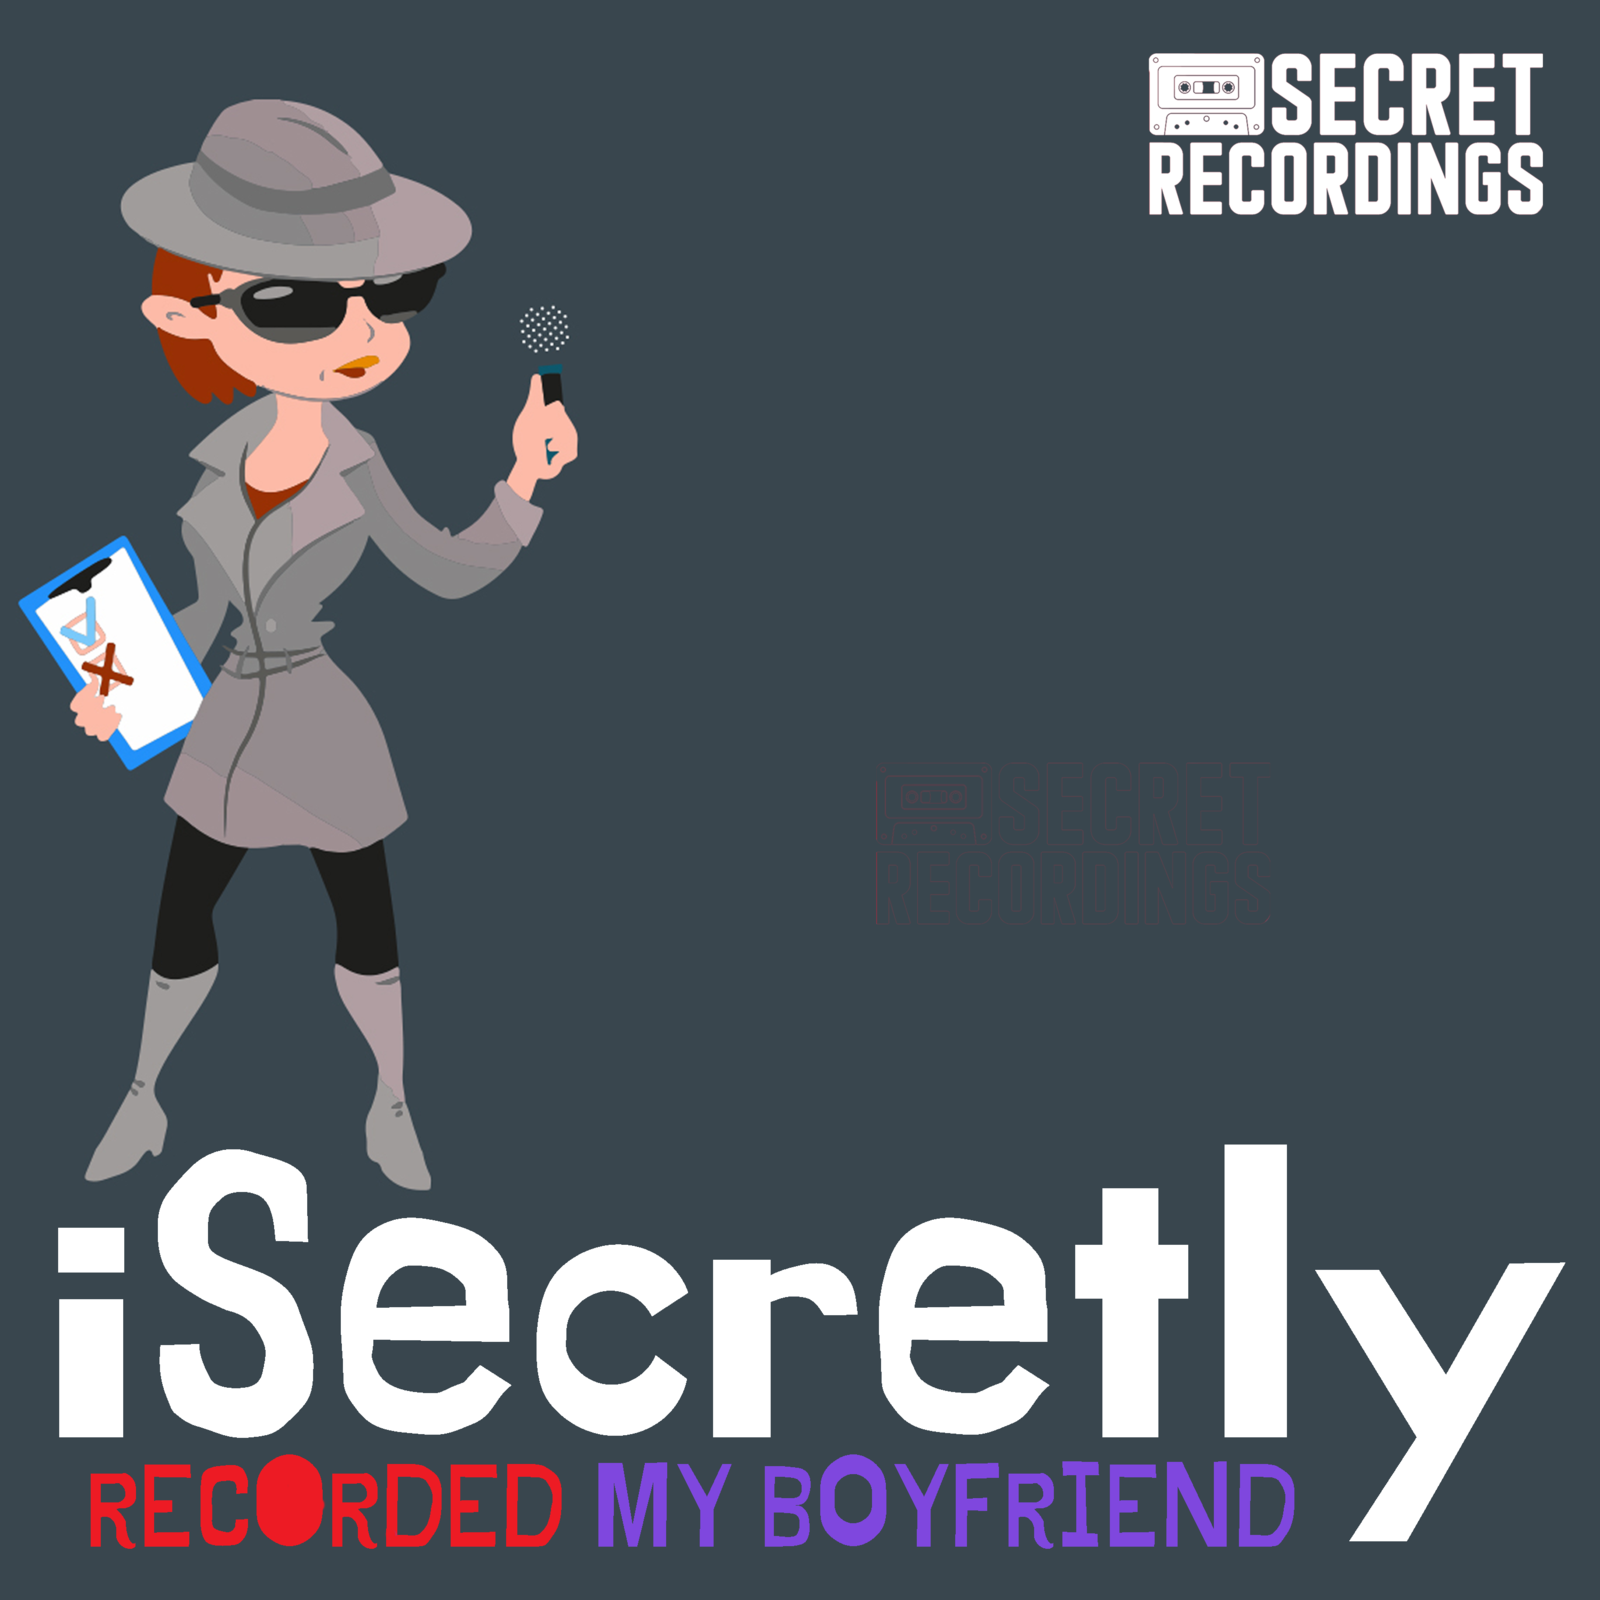 I secretly recorded my boyfriend for 2 years and now he’s found out!